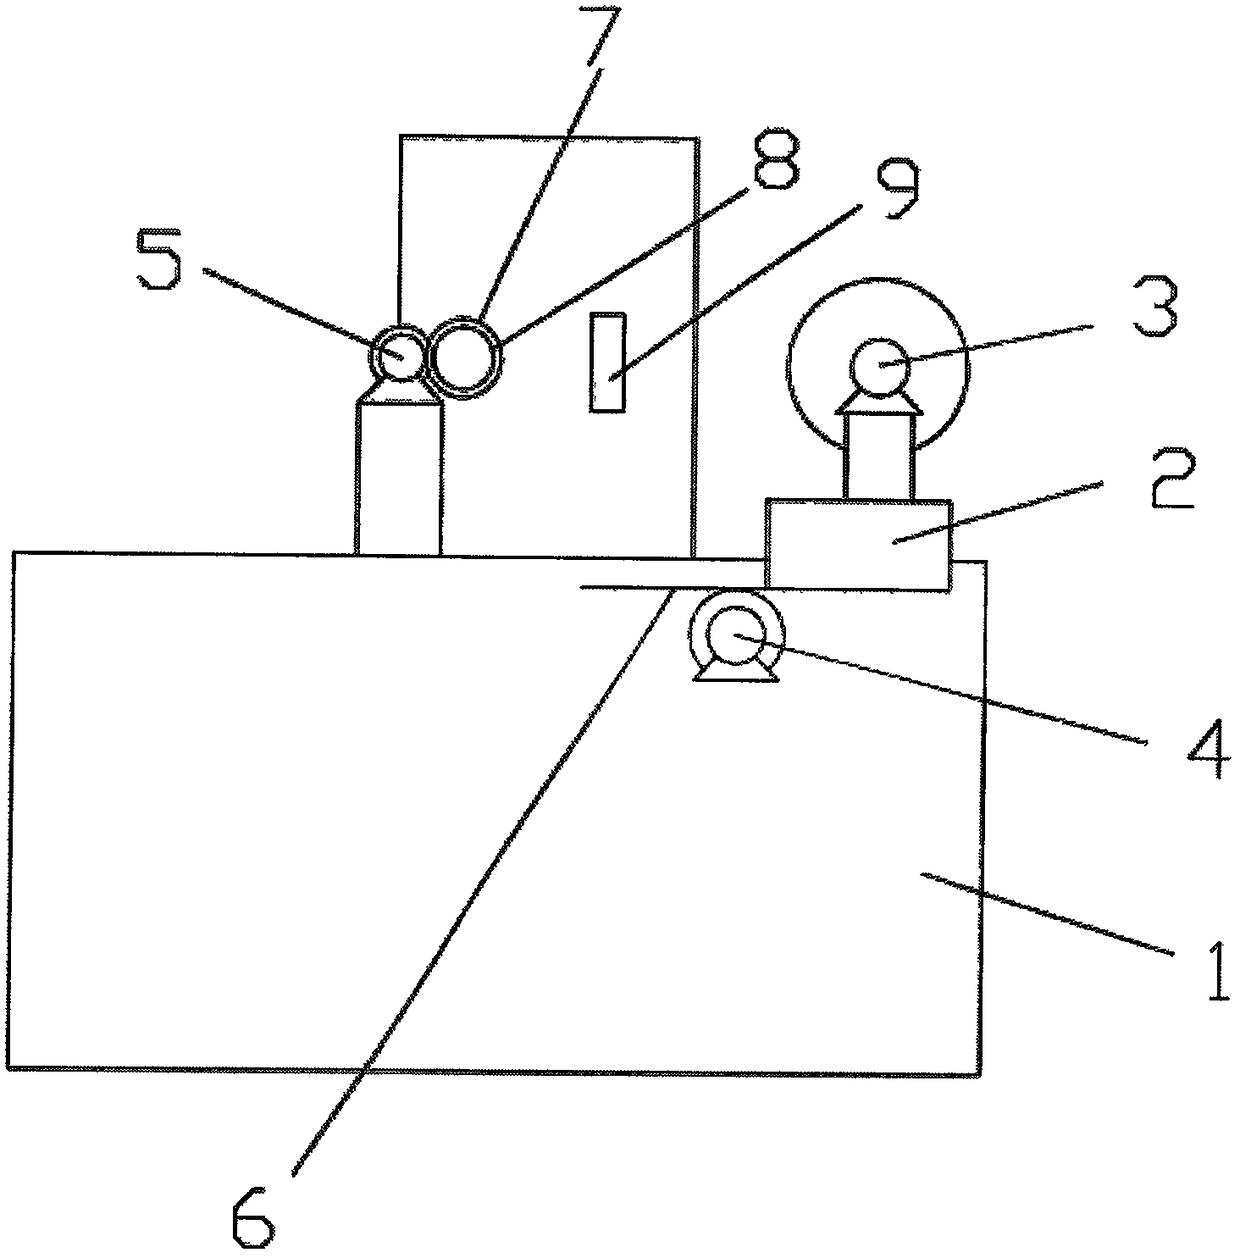 An automatic cutting device for server cabinet frame support rods